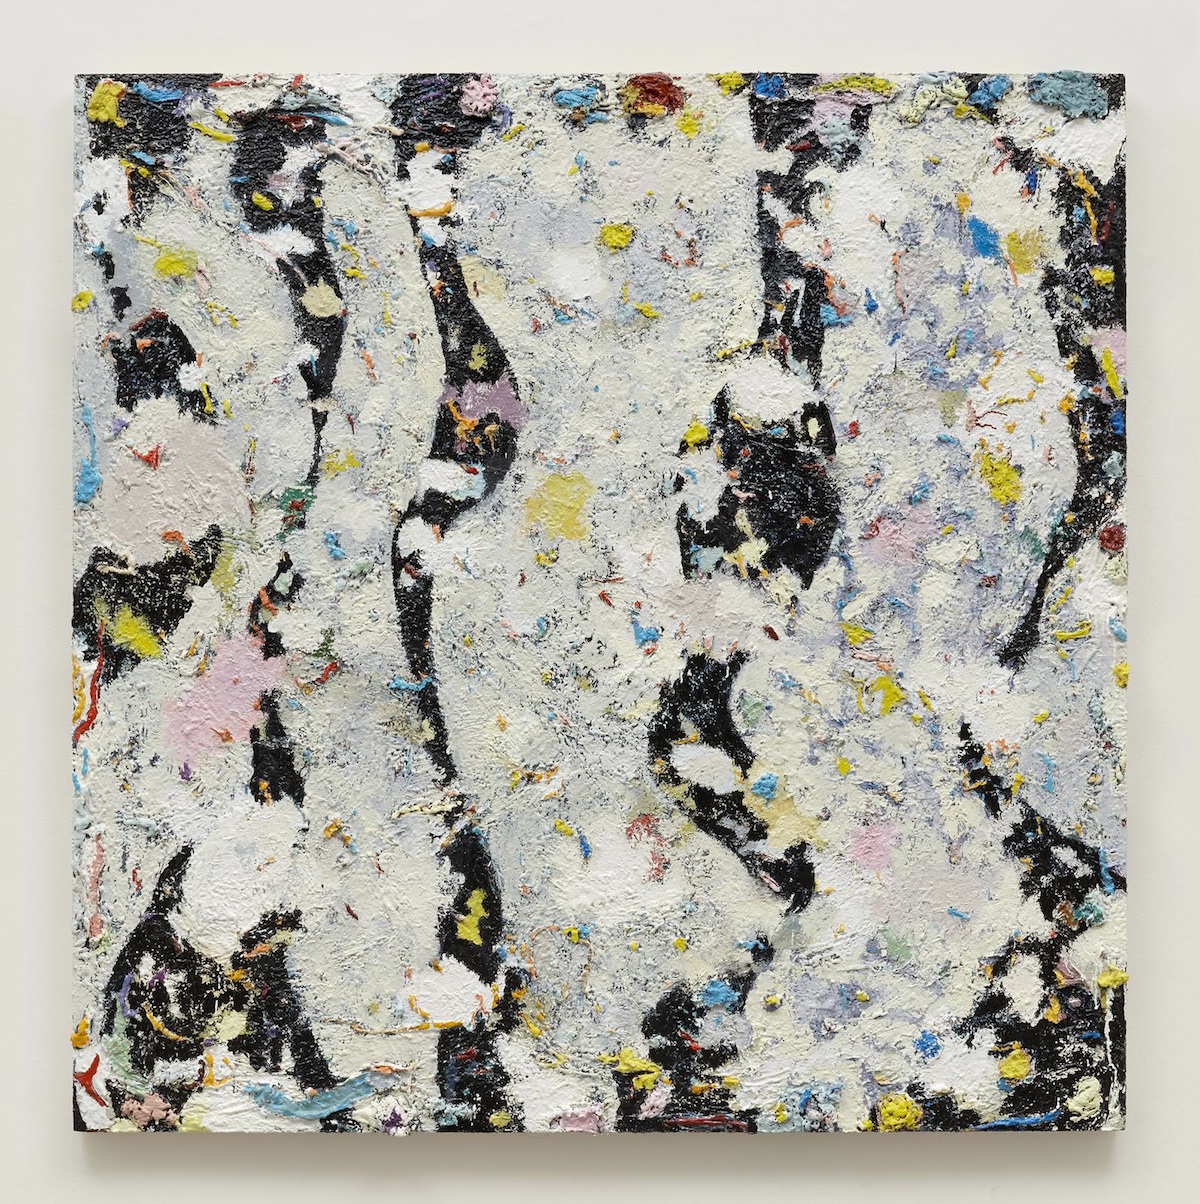 Phillip Allen, Deepdrippings (International Version), 2017, oil on board, 183 x 183 cm, image courtesy the artist and Kerlin Gallery. Photography by Denis Mortell.